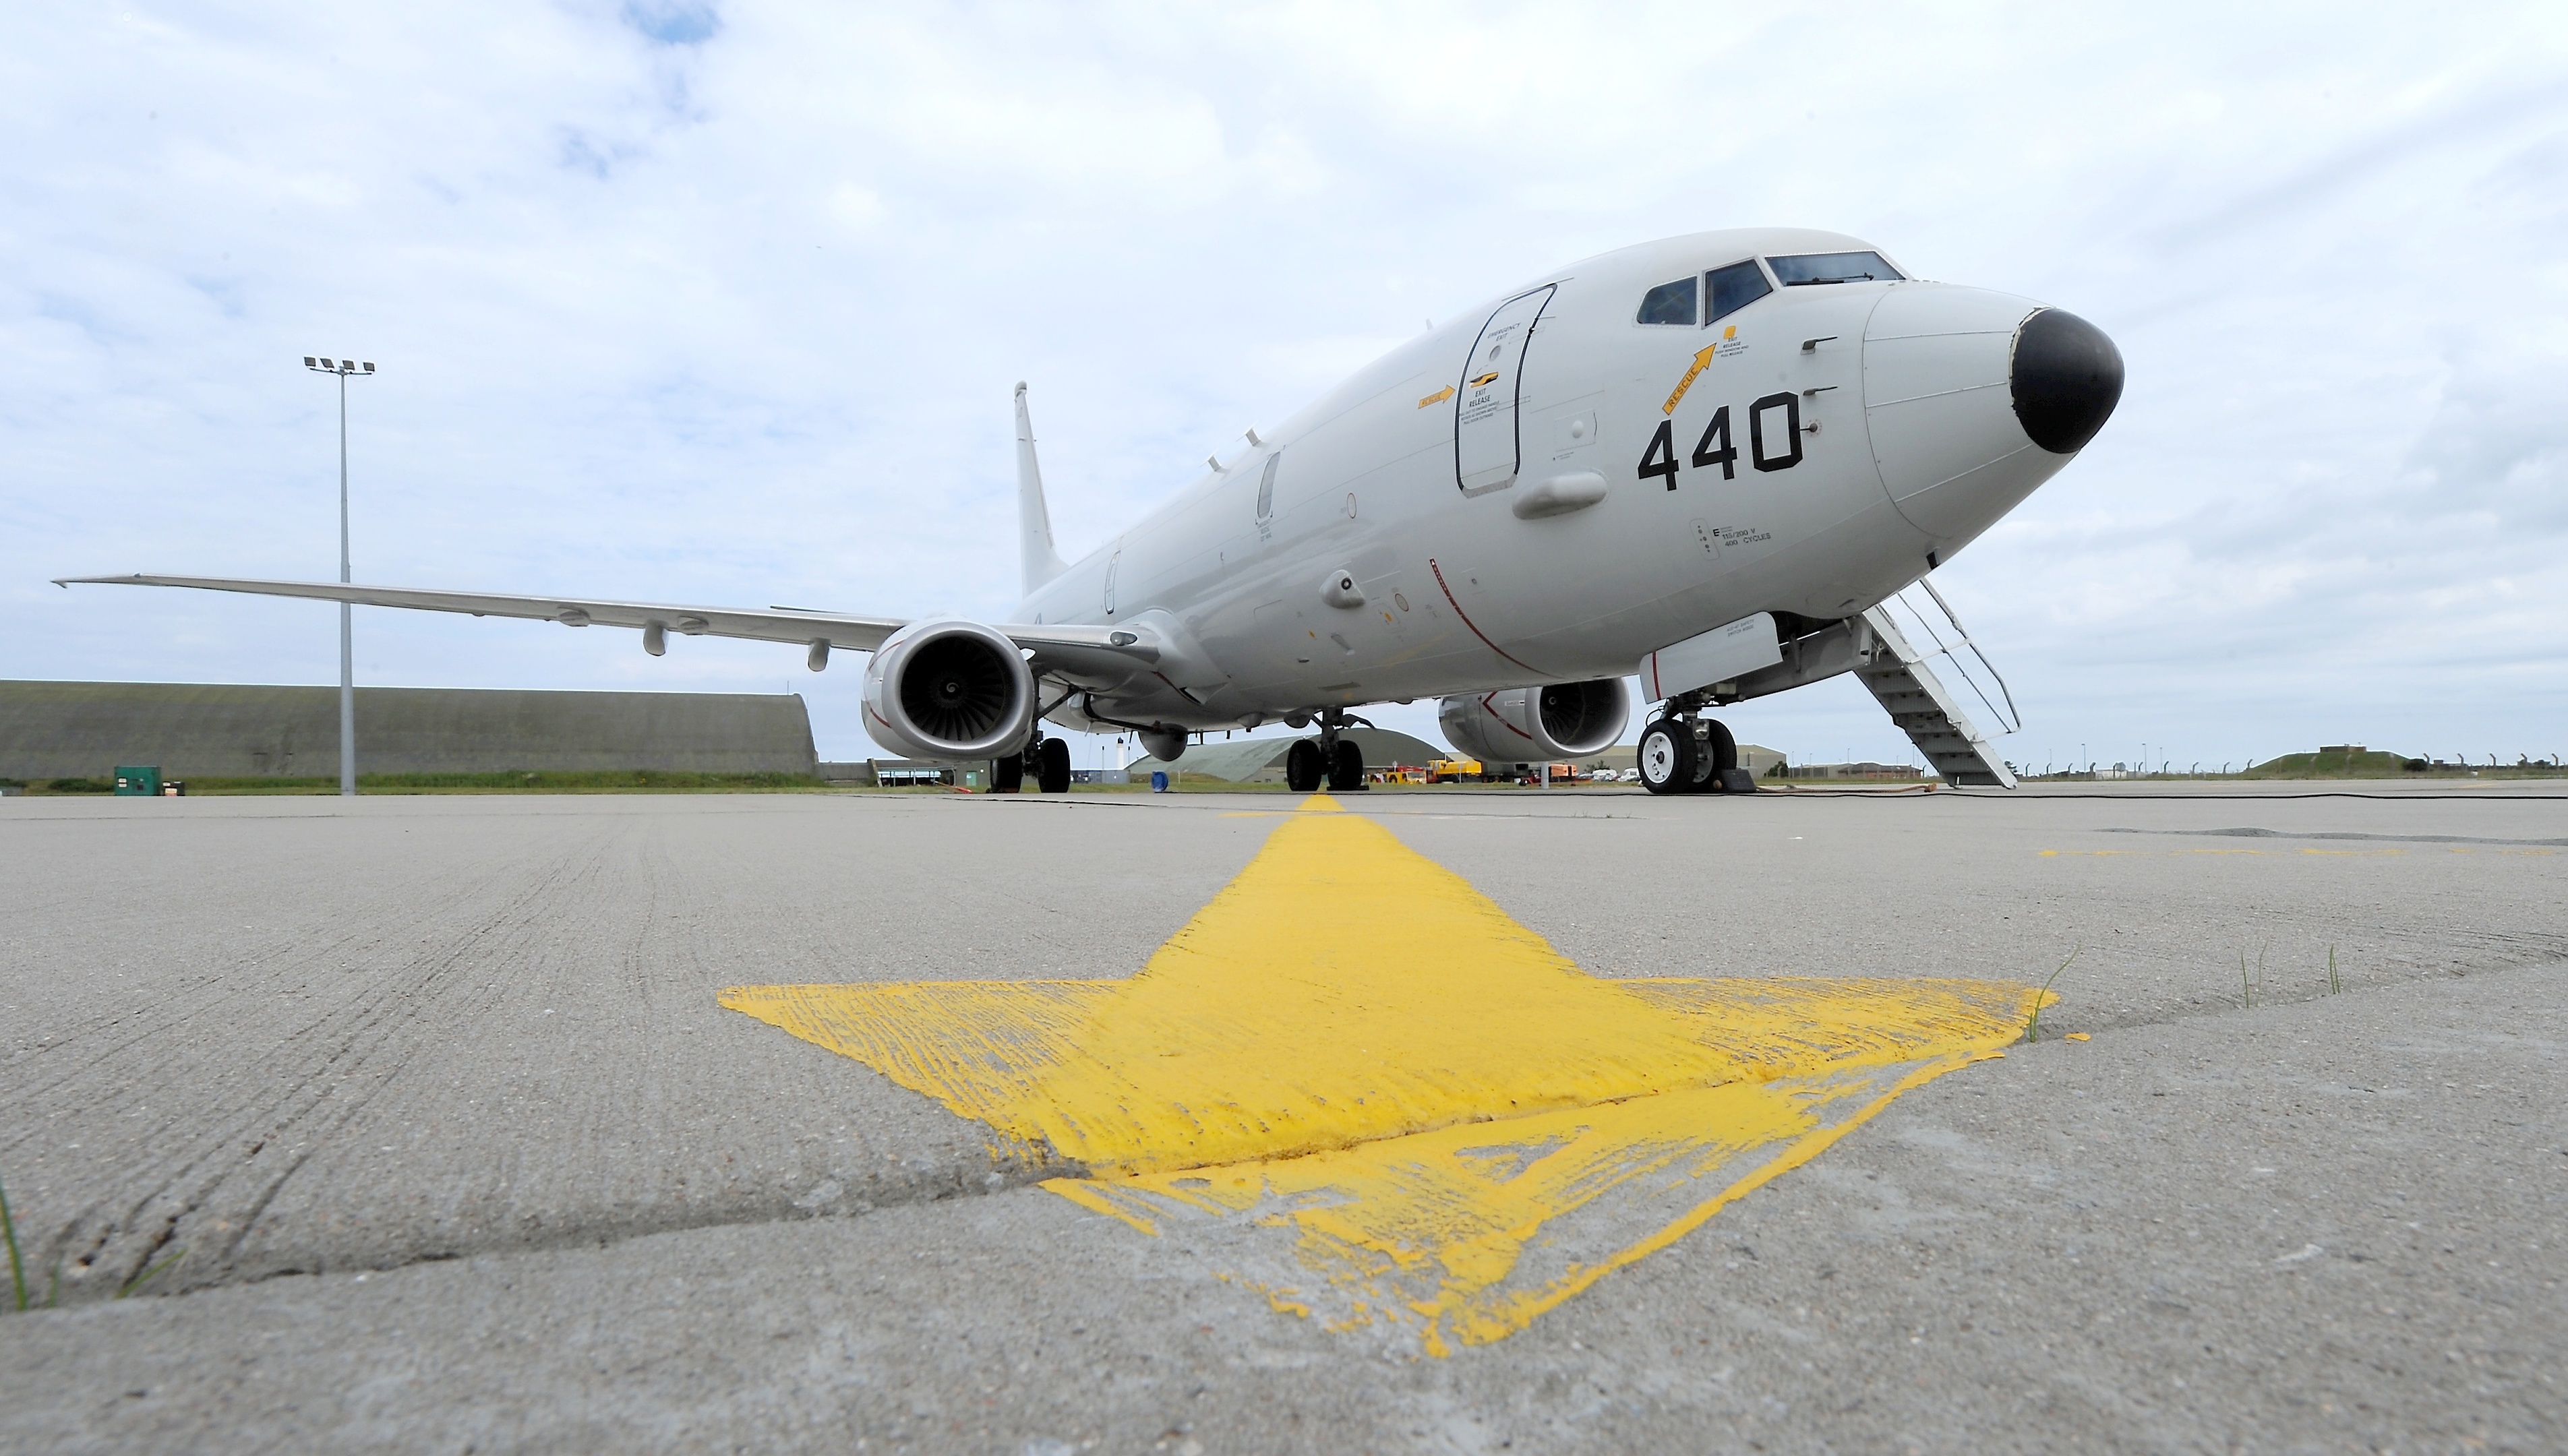 The Defence Secratary yesterday announced the Squadrons who will fly the new P-8A Poseidon Maritime Patrol aircraft from RAF Lossiemouth when they come in to service in the coming years.